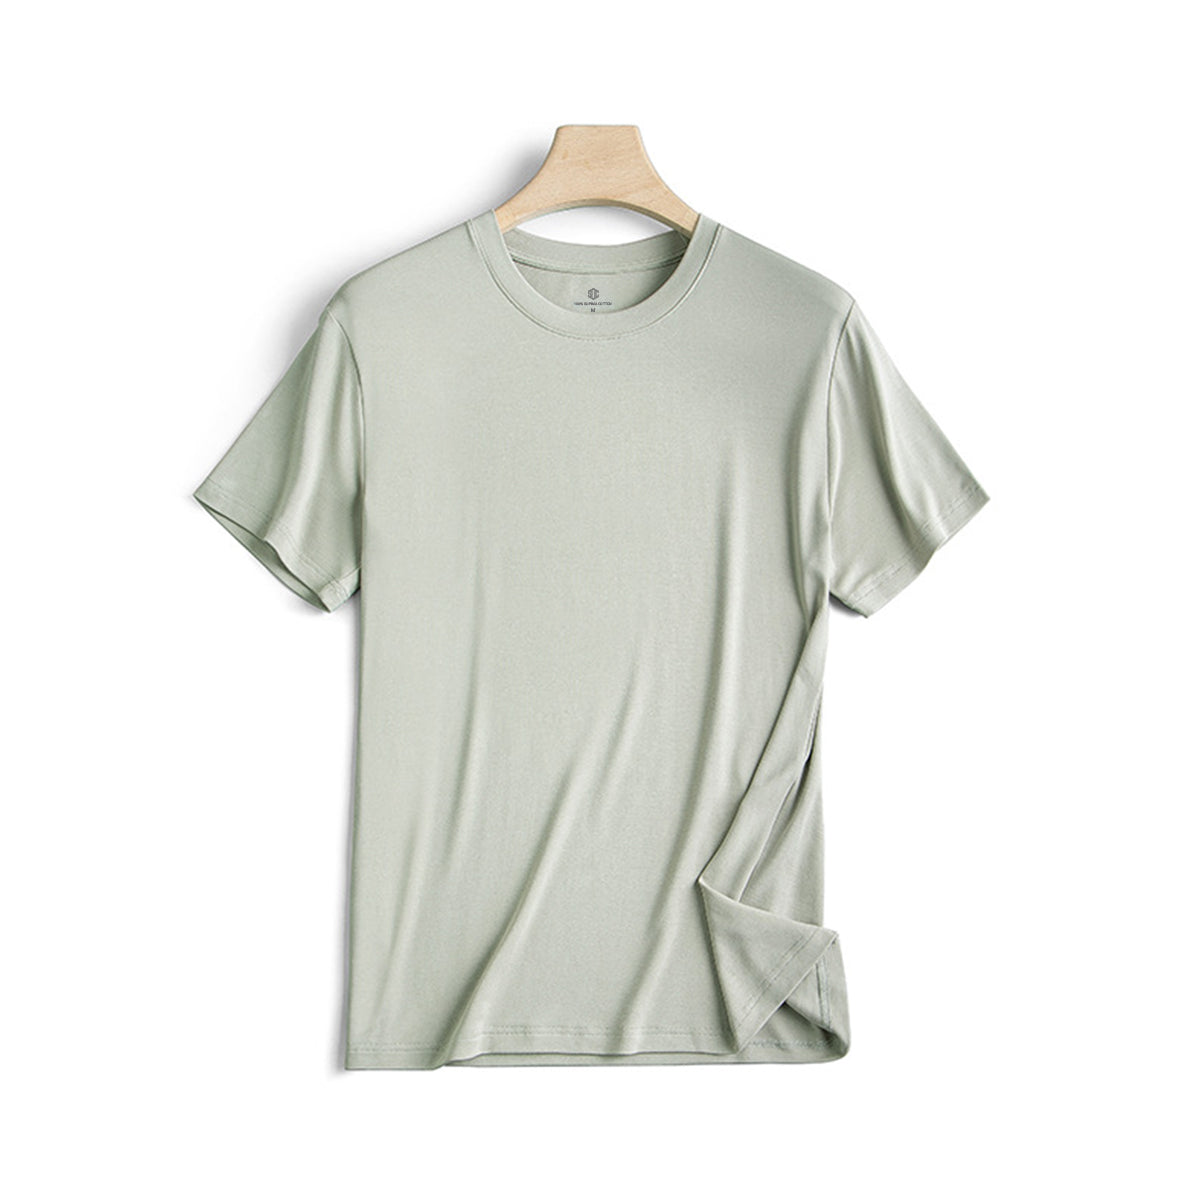 60S Modal Spring and Summer Leisure Solid Color Round Neck Men's Short Sleeve Tees